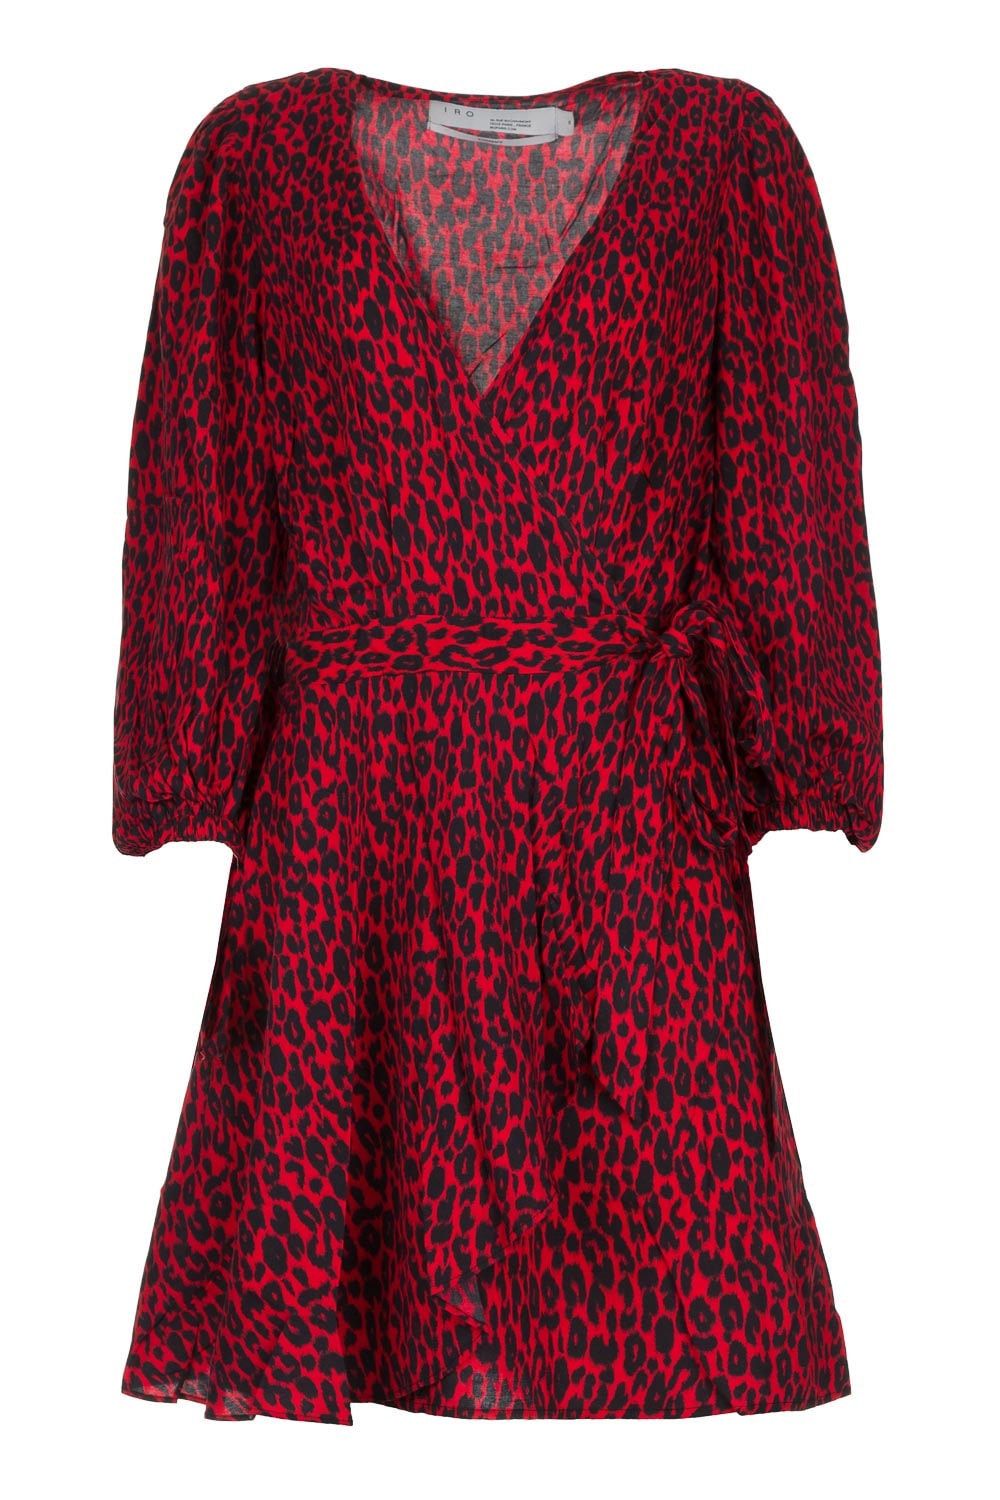 black and red leopard print dress